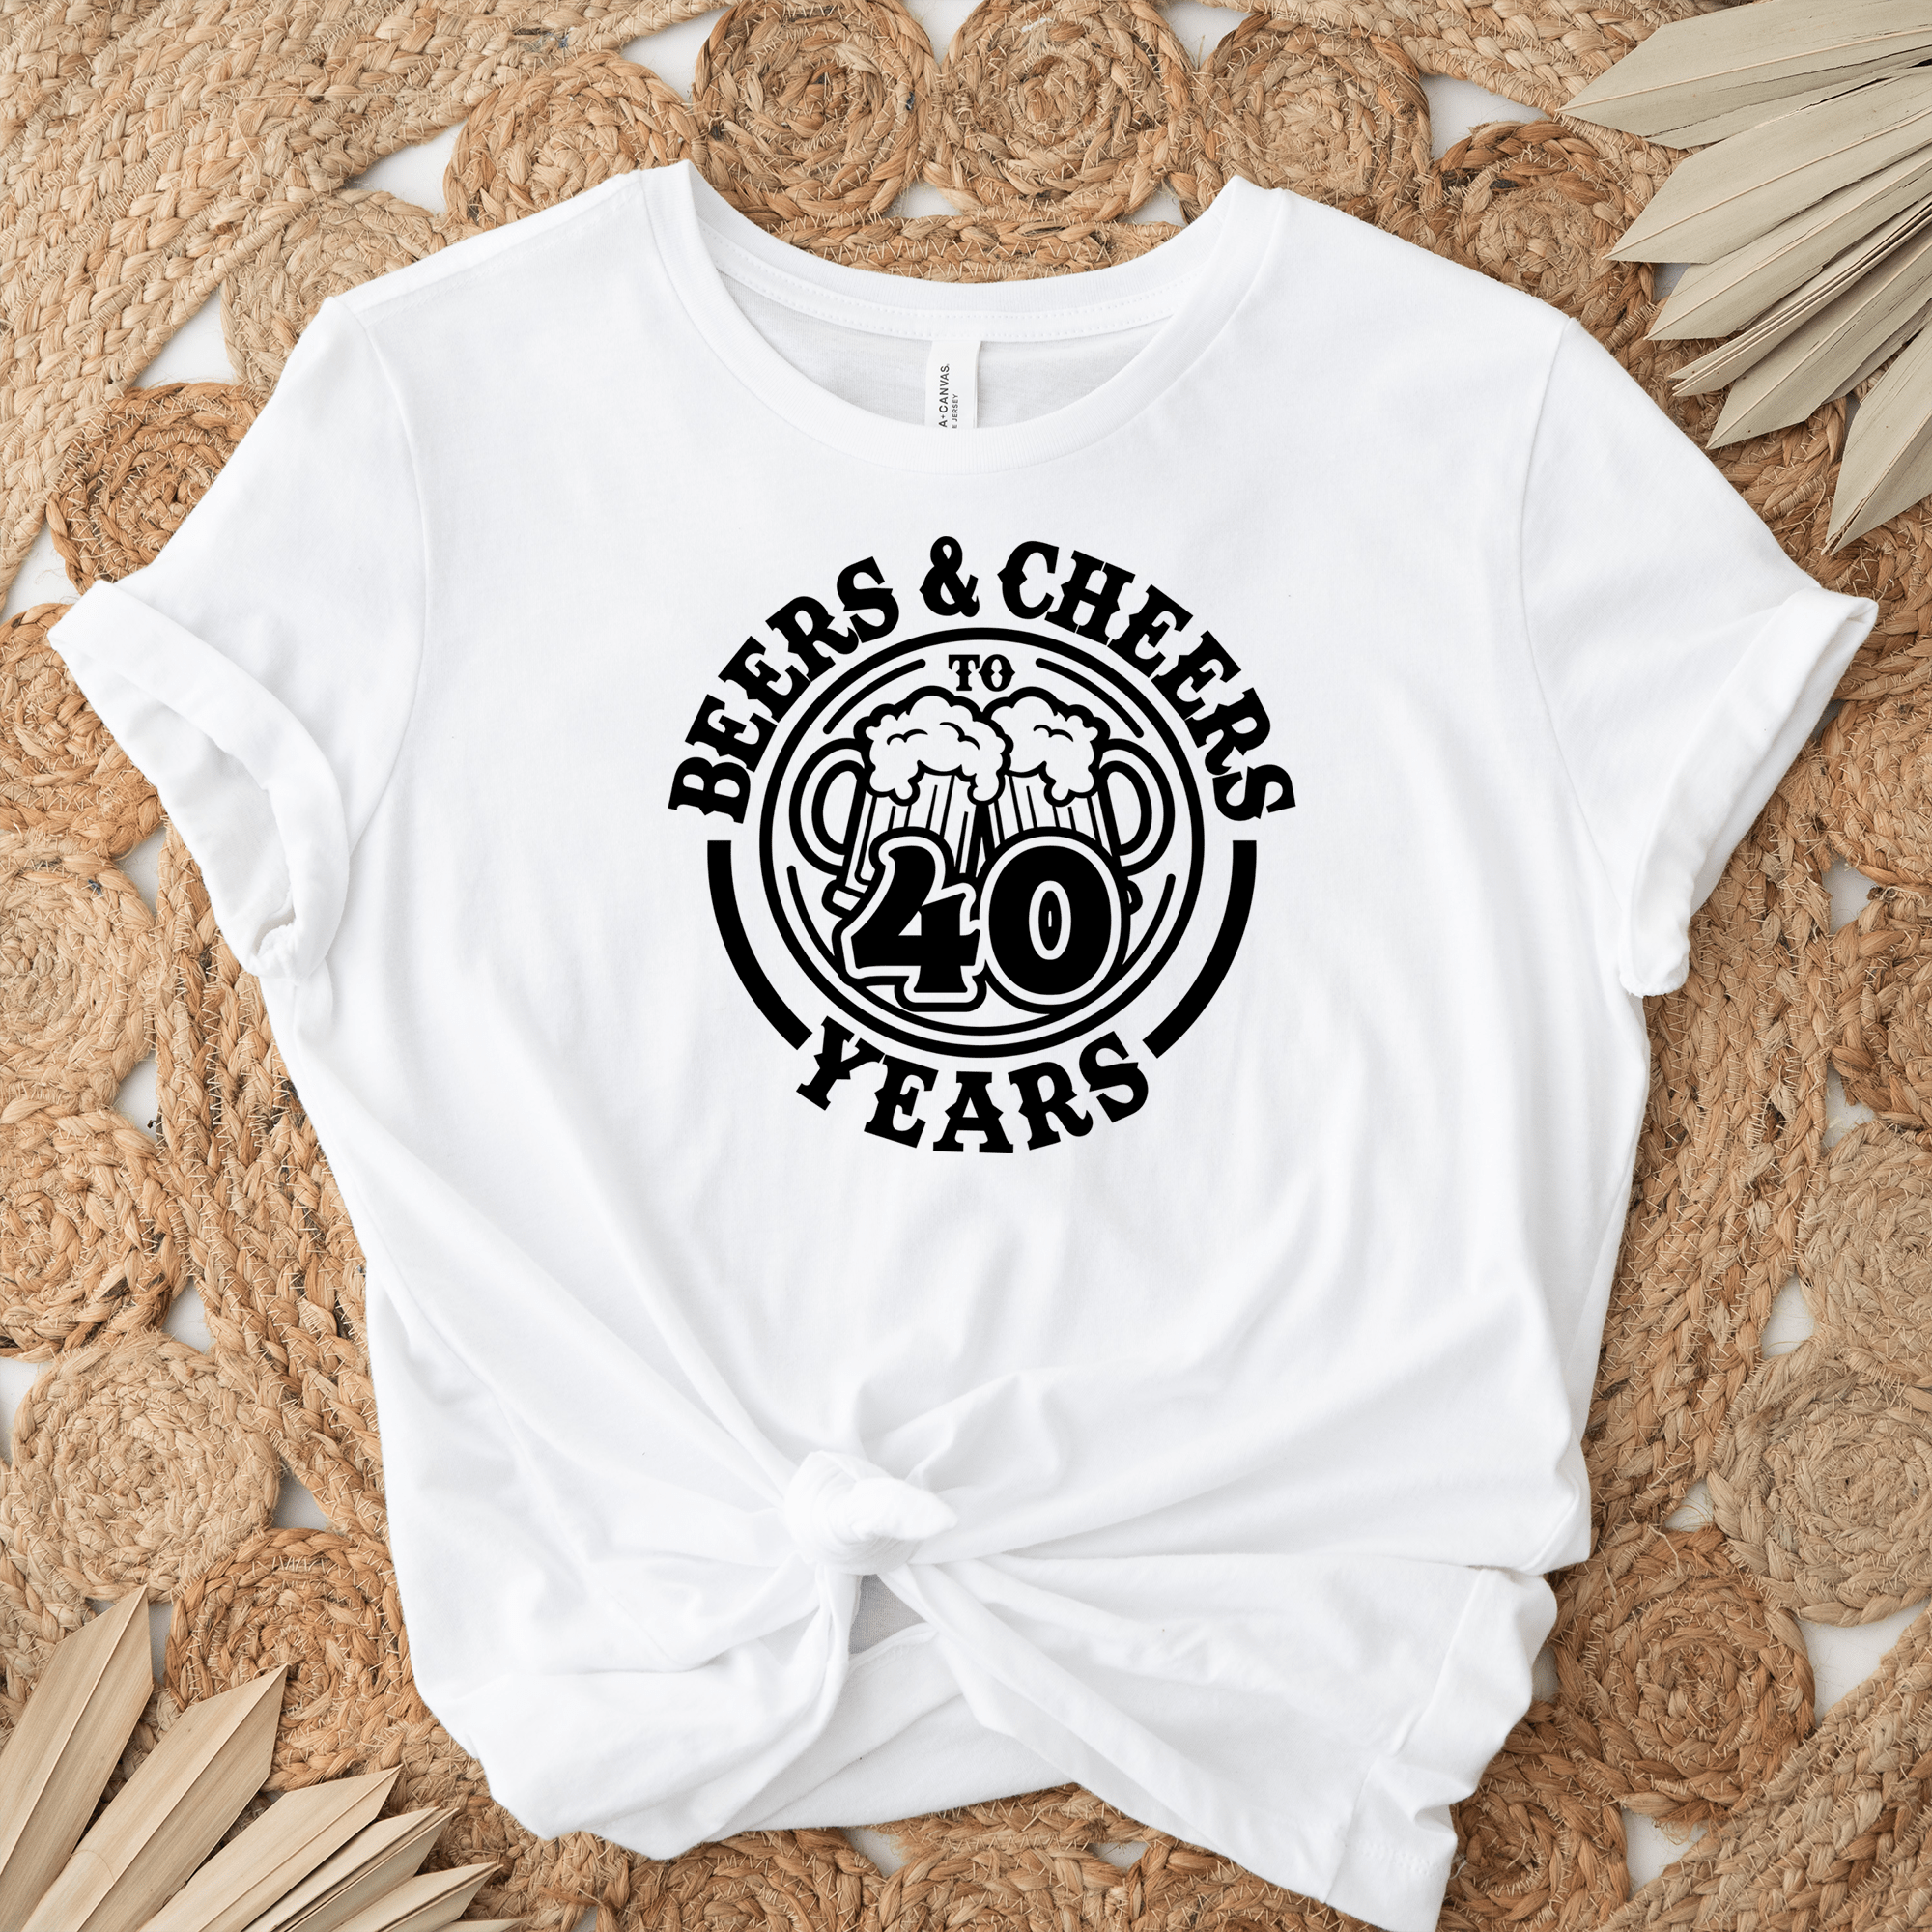 Womens White T Shirt with Cheers-And-Beers-40 design